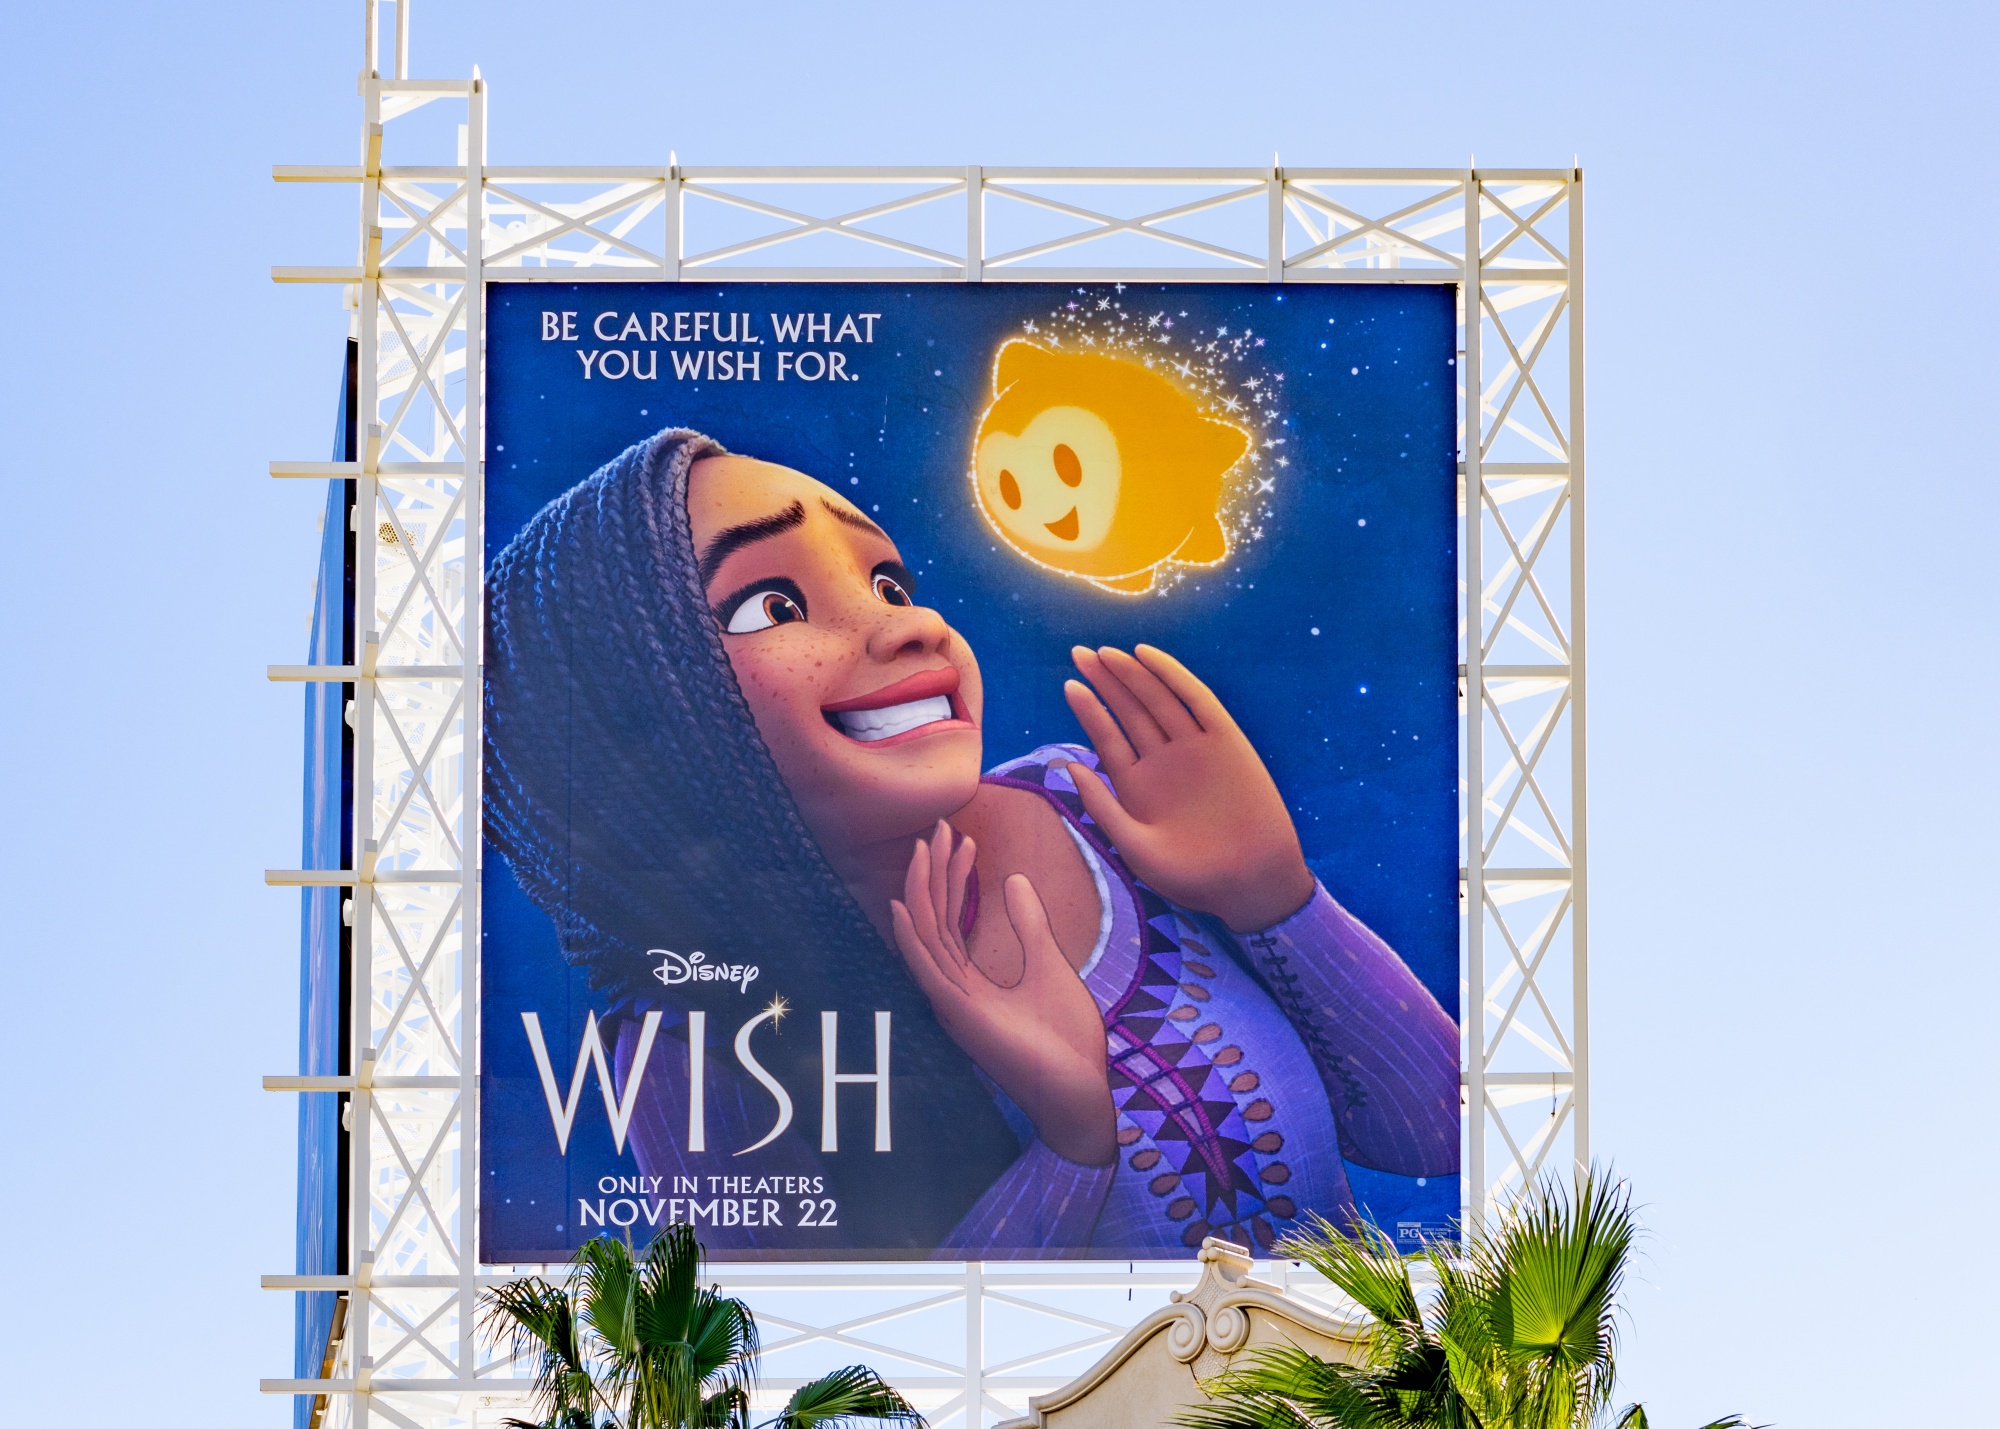 How 'Wish' Pays Homage to Classic Disney Films – The Hollywood Reporter